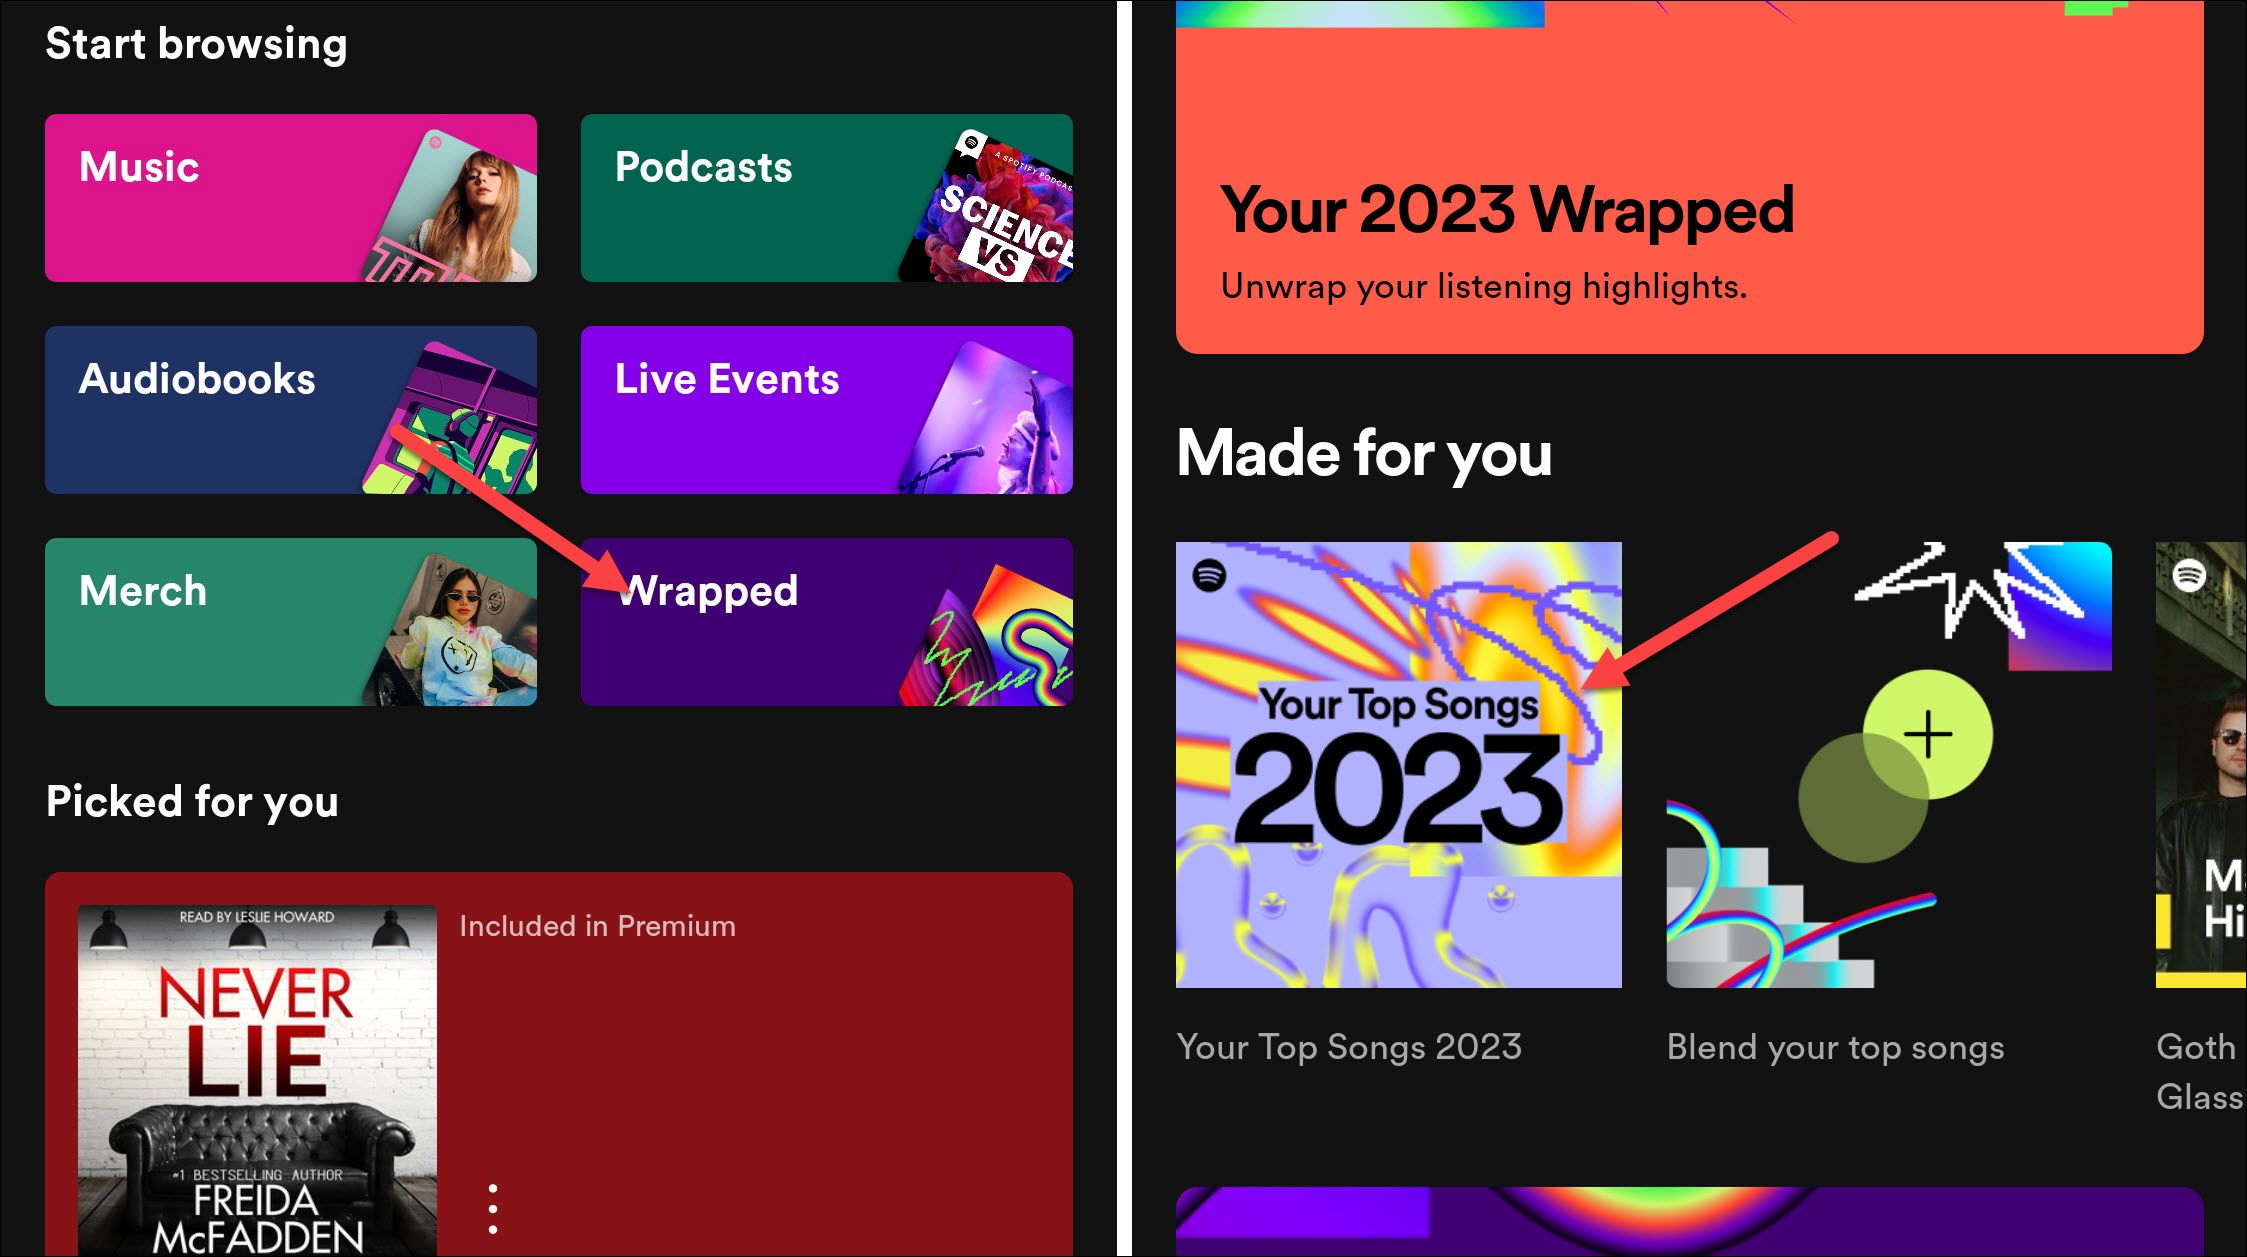 How to Find Your Spotify Wrapped 2023